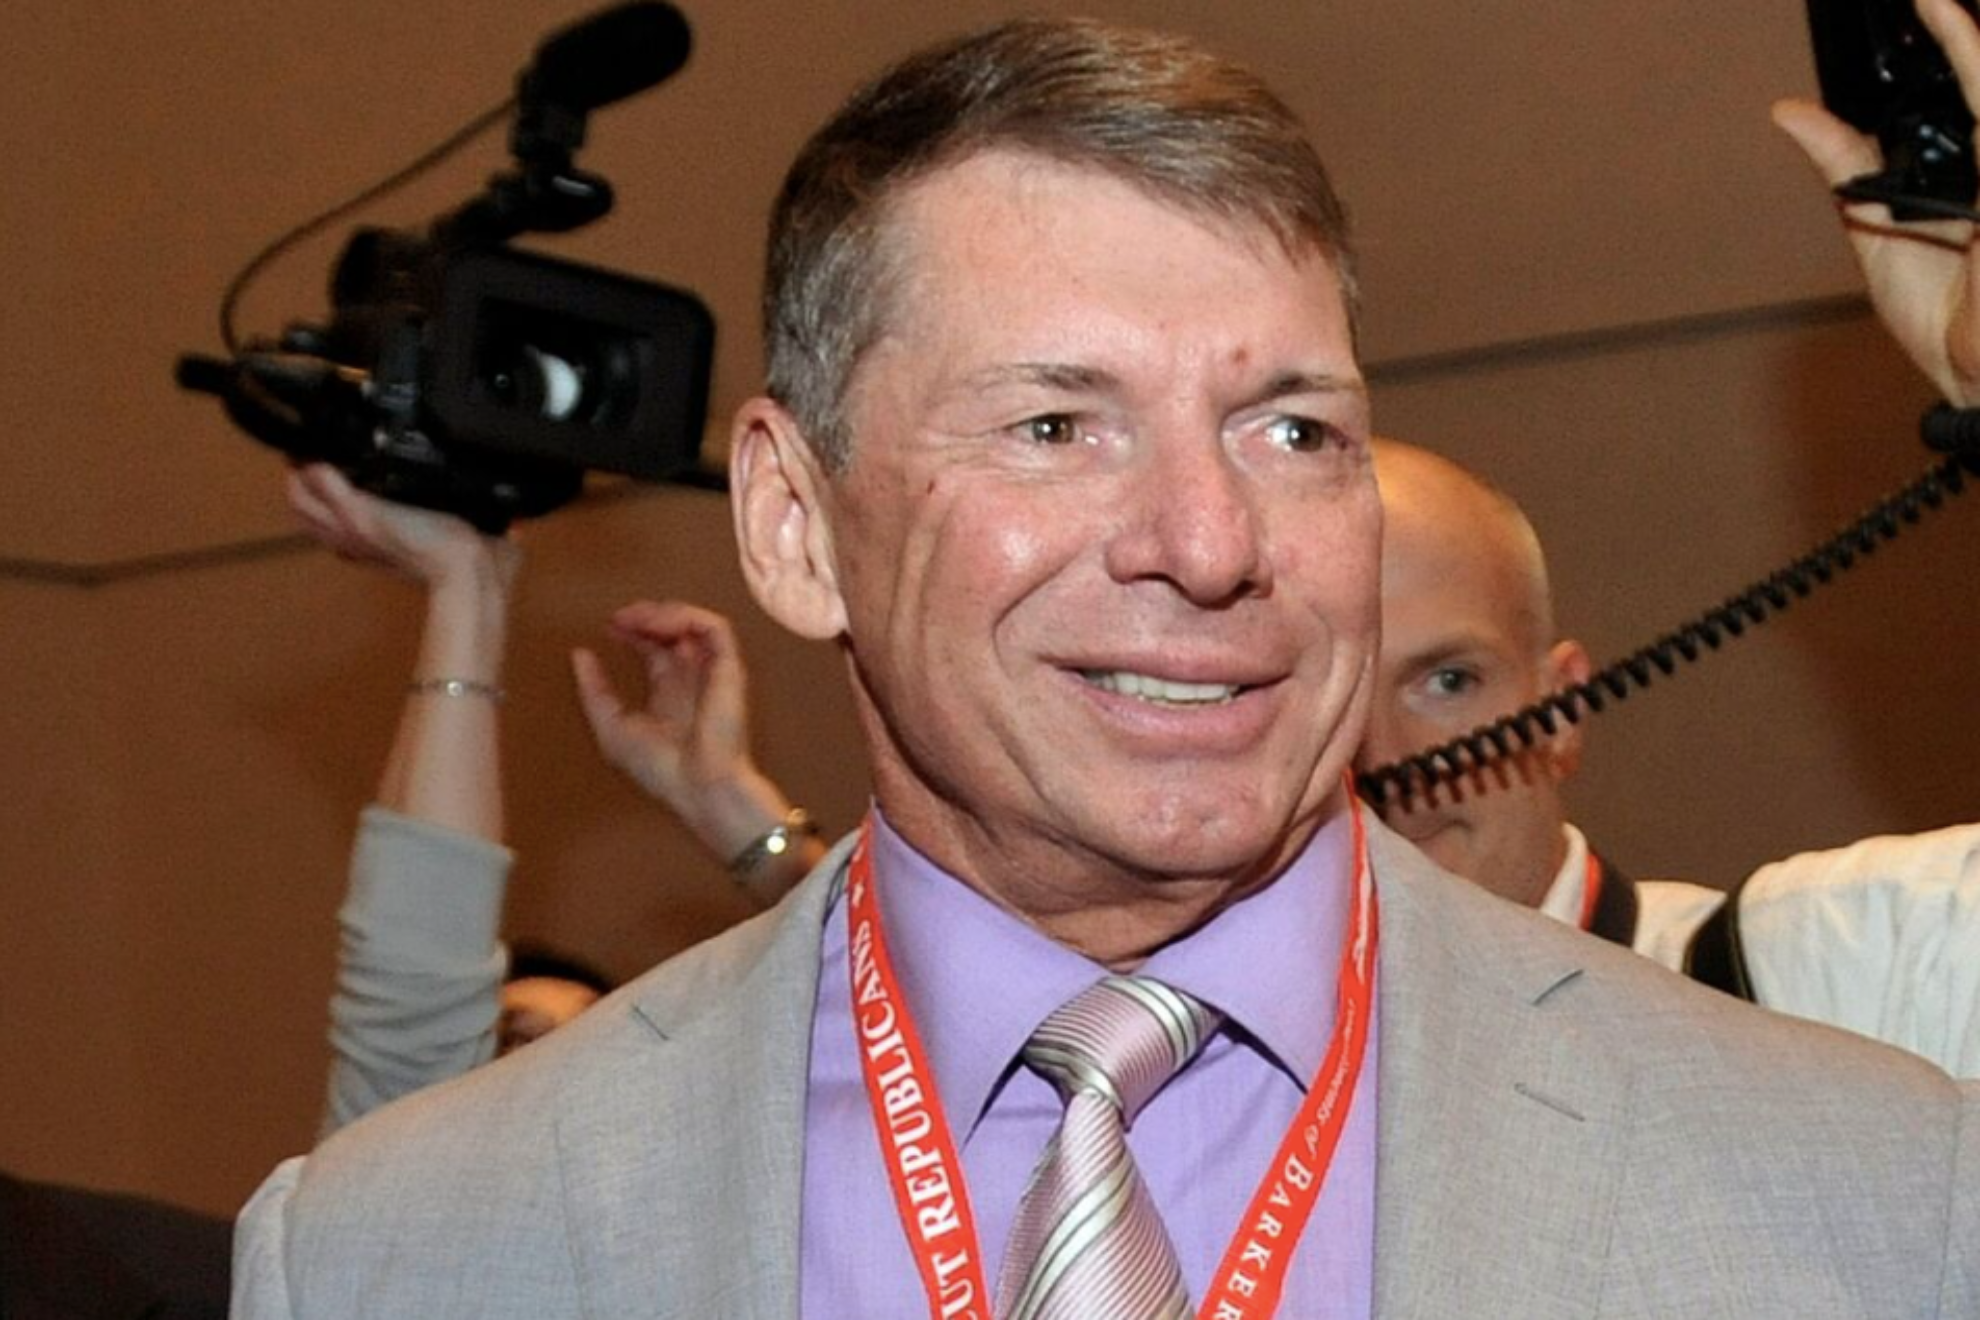 Bidding war for WWE begins with sale of Vince McMahon's company getting underway